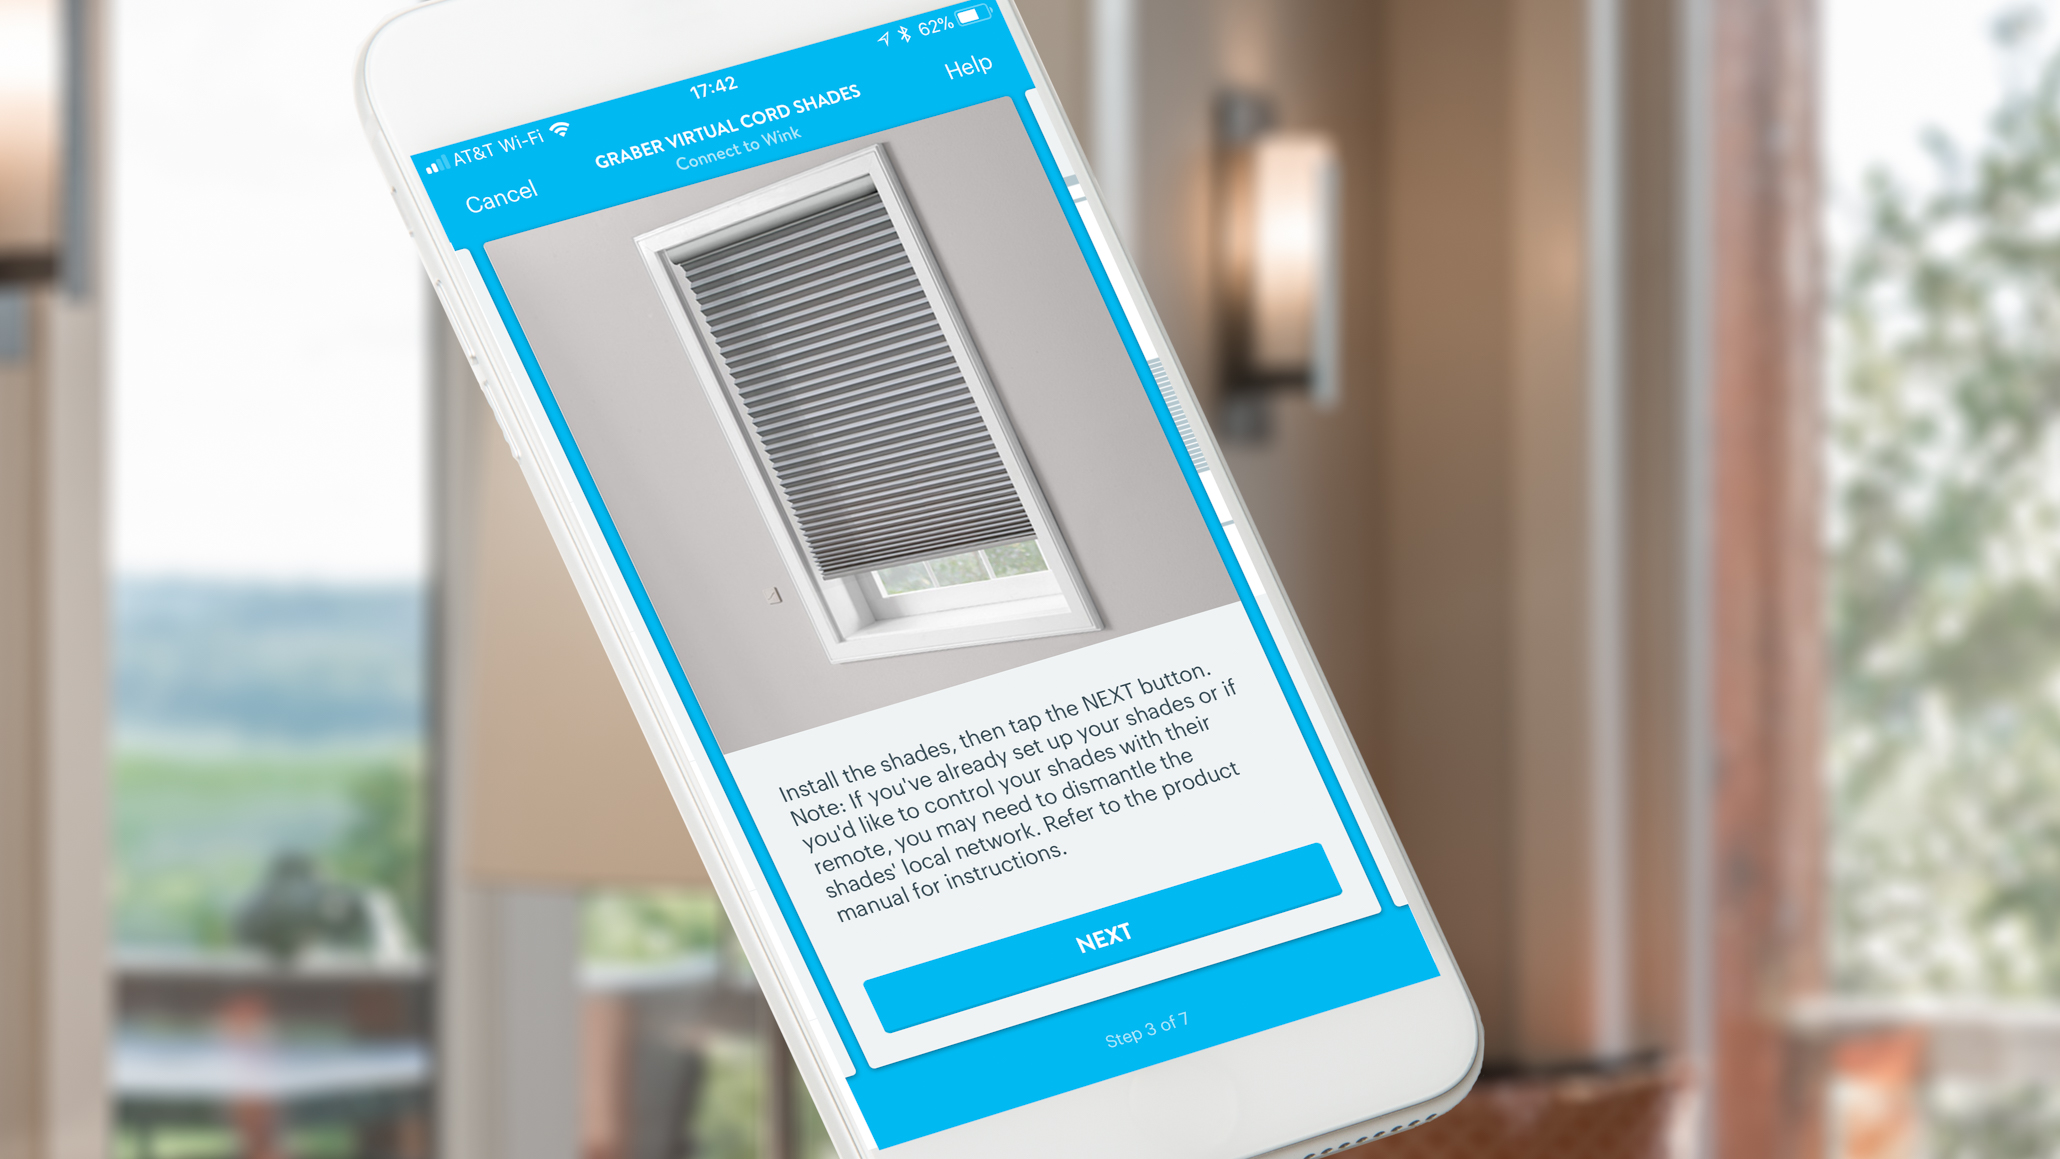 Graber offers a wide variety of shades with their Virtual Cord motorization option, which employs a Somfy motor and built-in Z-Wave radio for integrating with various smart-home automation systems. Image: Digitized House.